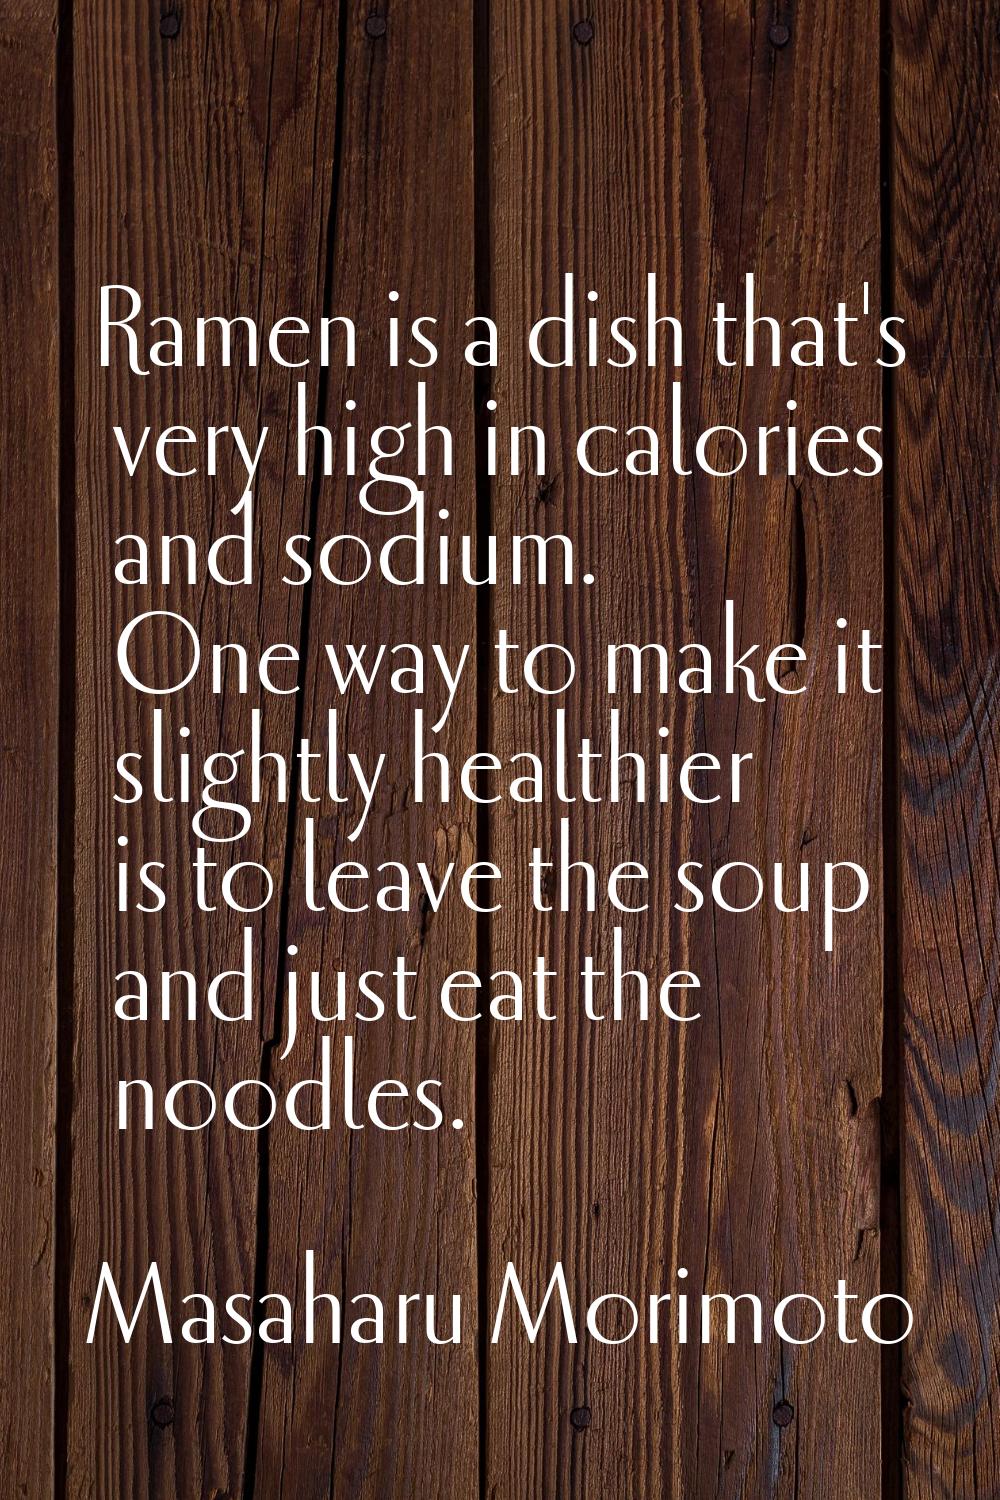 Ramen is a dish that's very high in calories and sodium. One way to make it slightly healthier is t